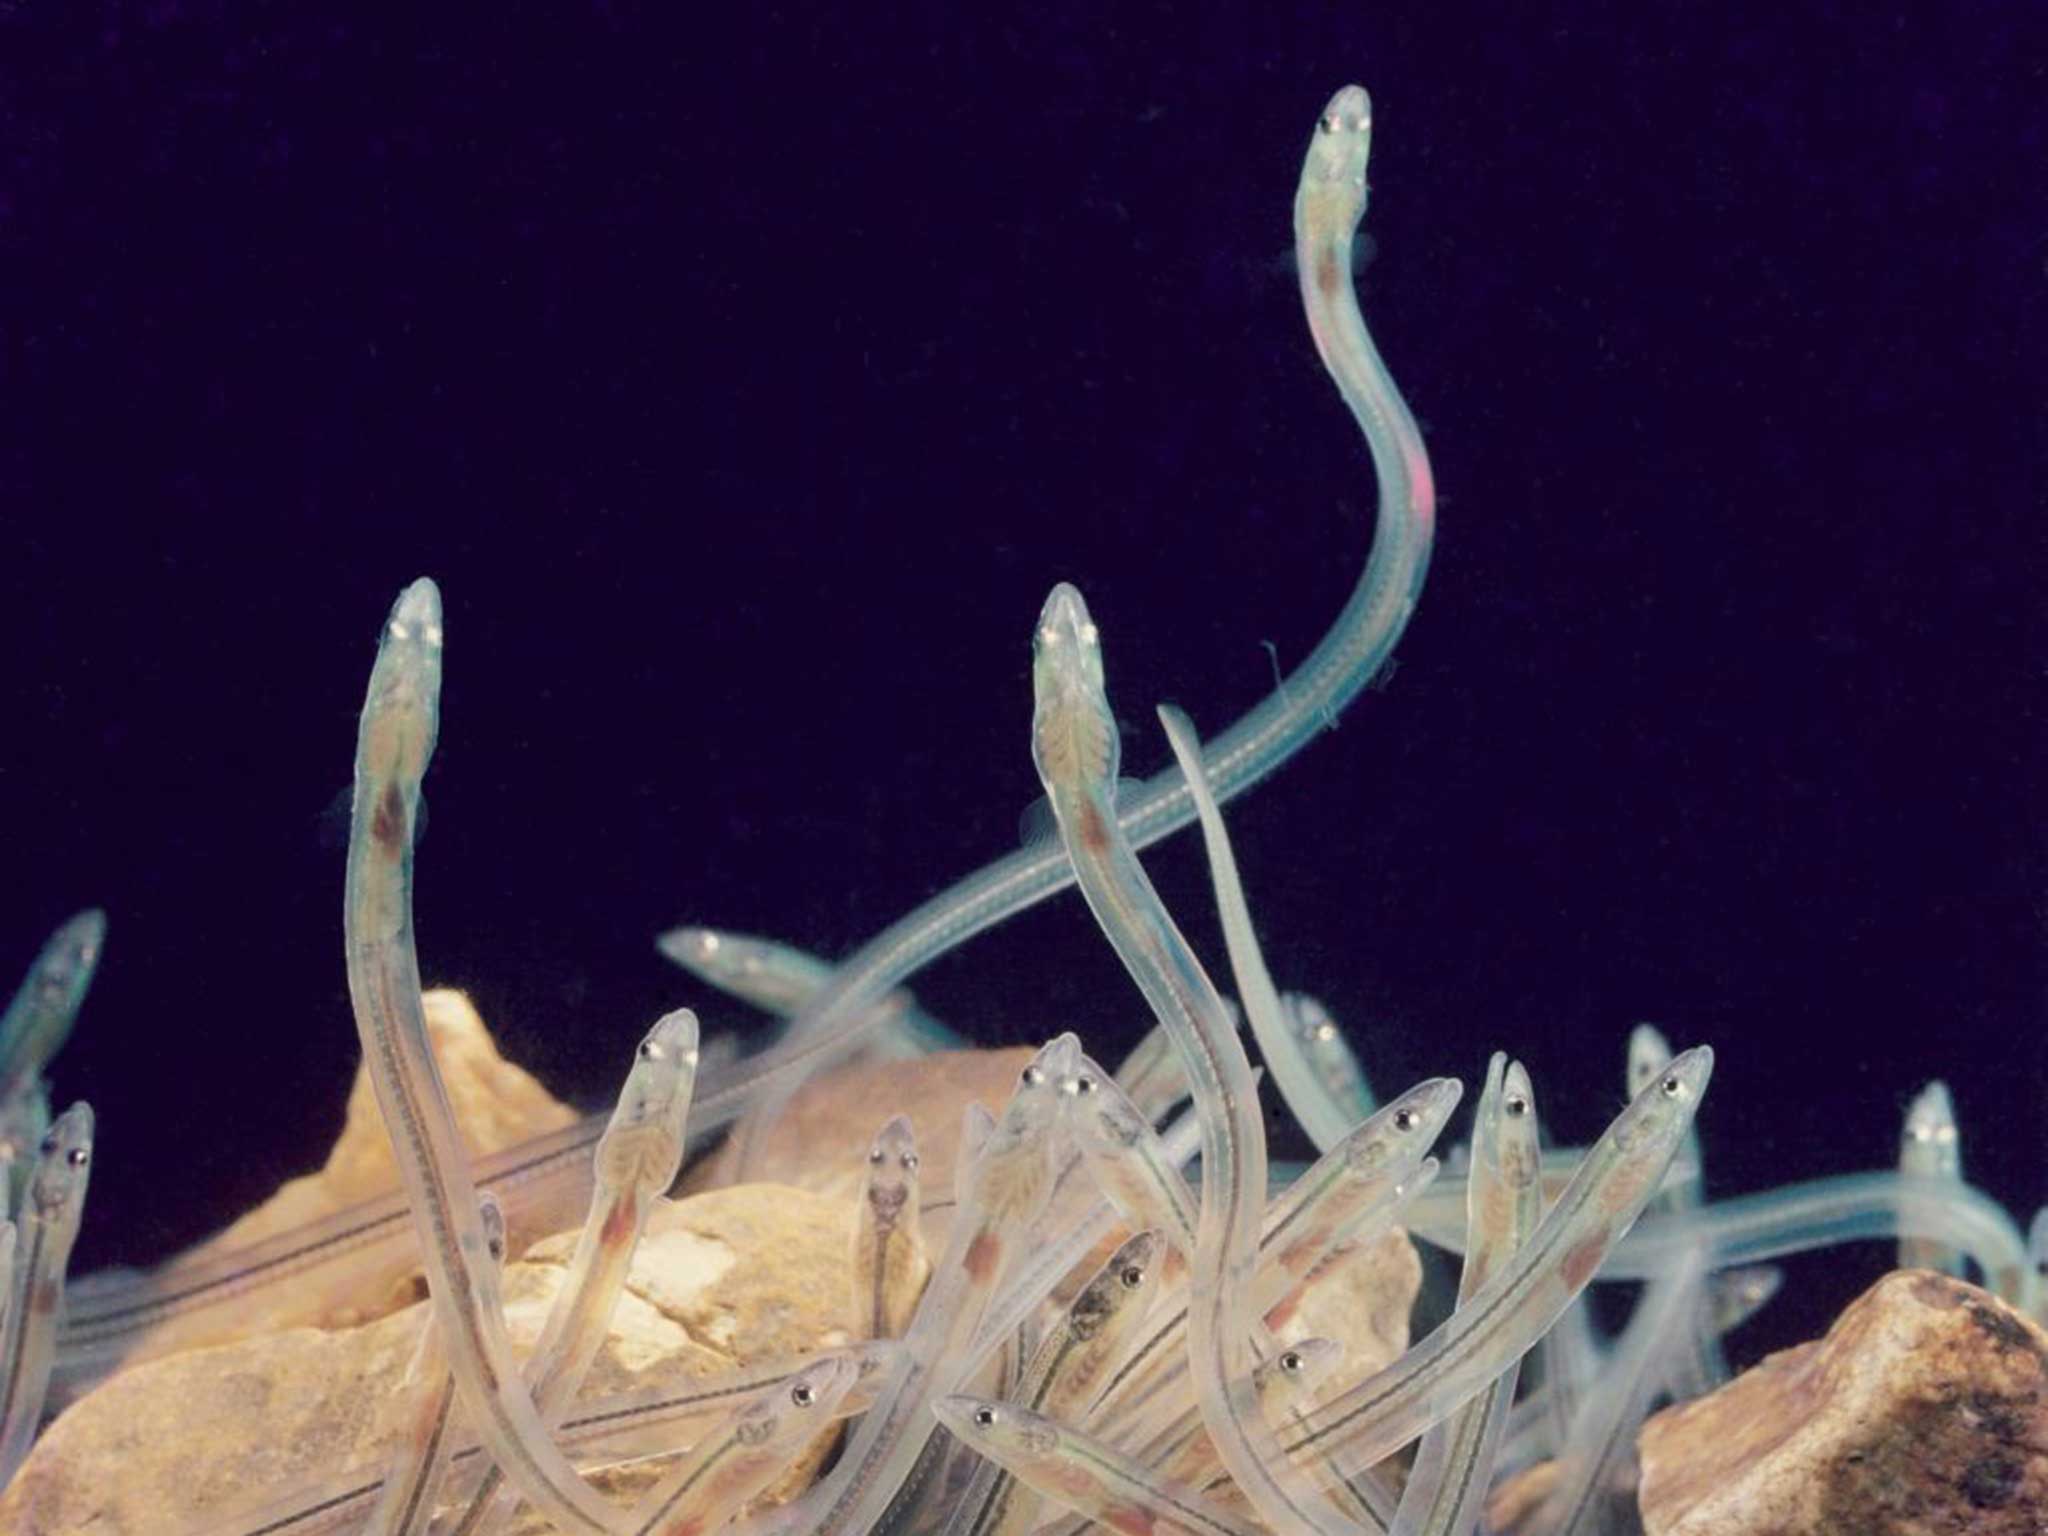 Common eel elvers have enjoyed a resurgence in recent years